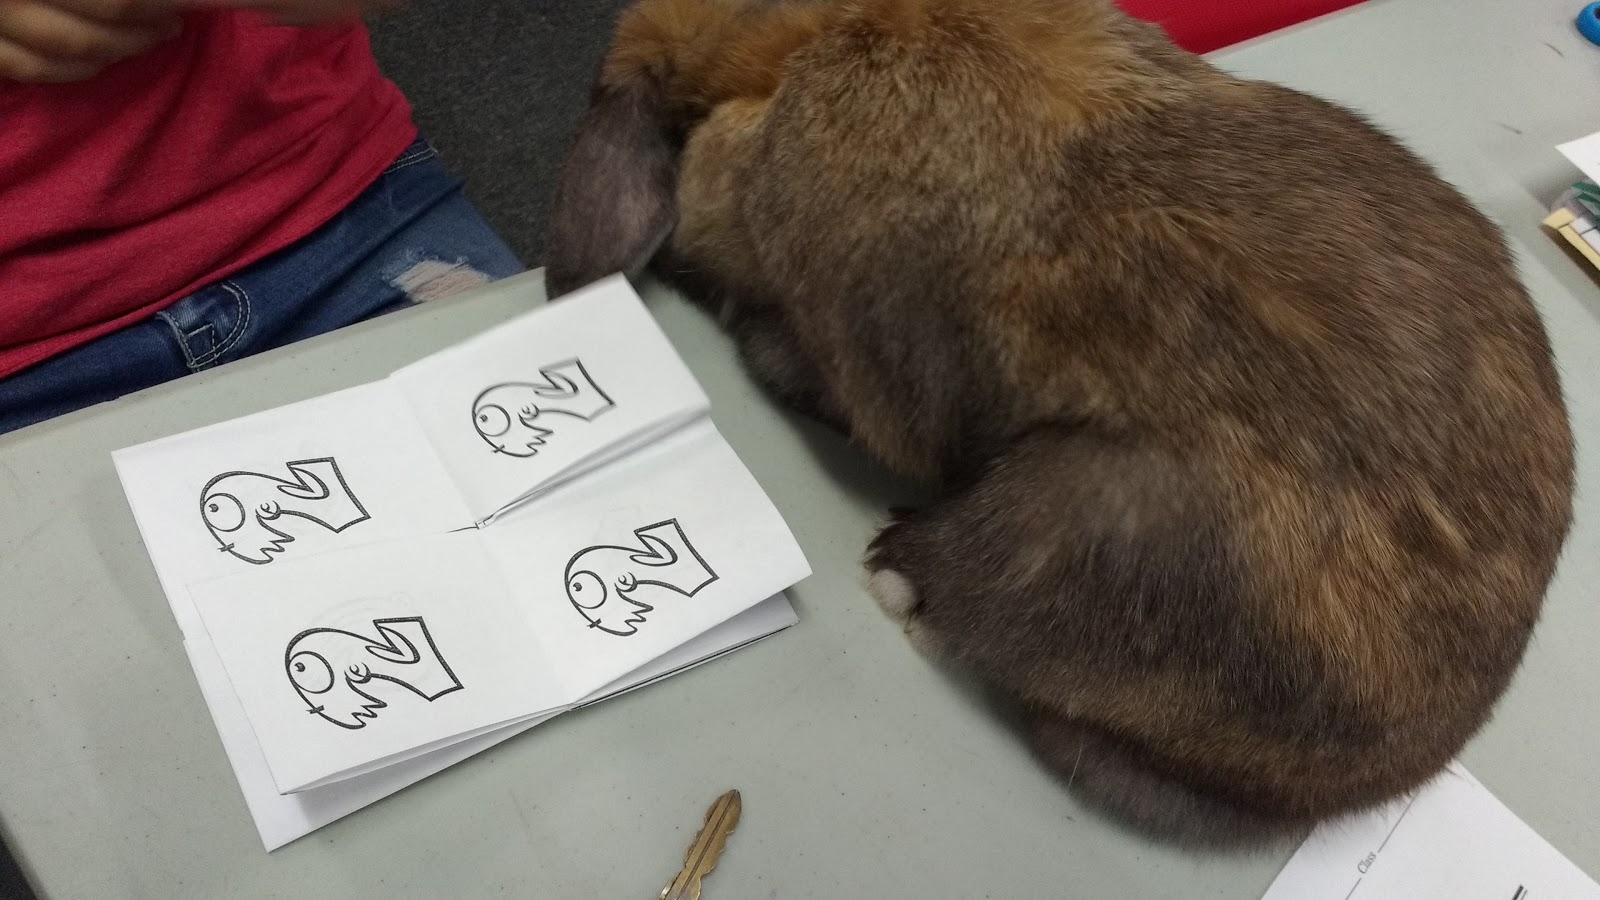 solution to 2 on crazy eight paper folding puzzle next to rabbit on table. 